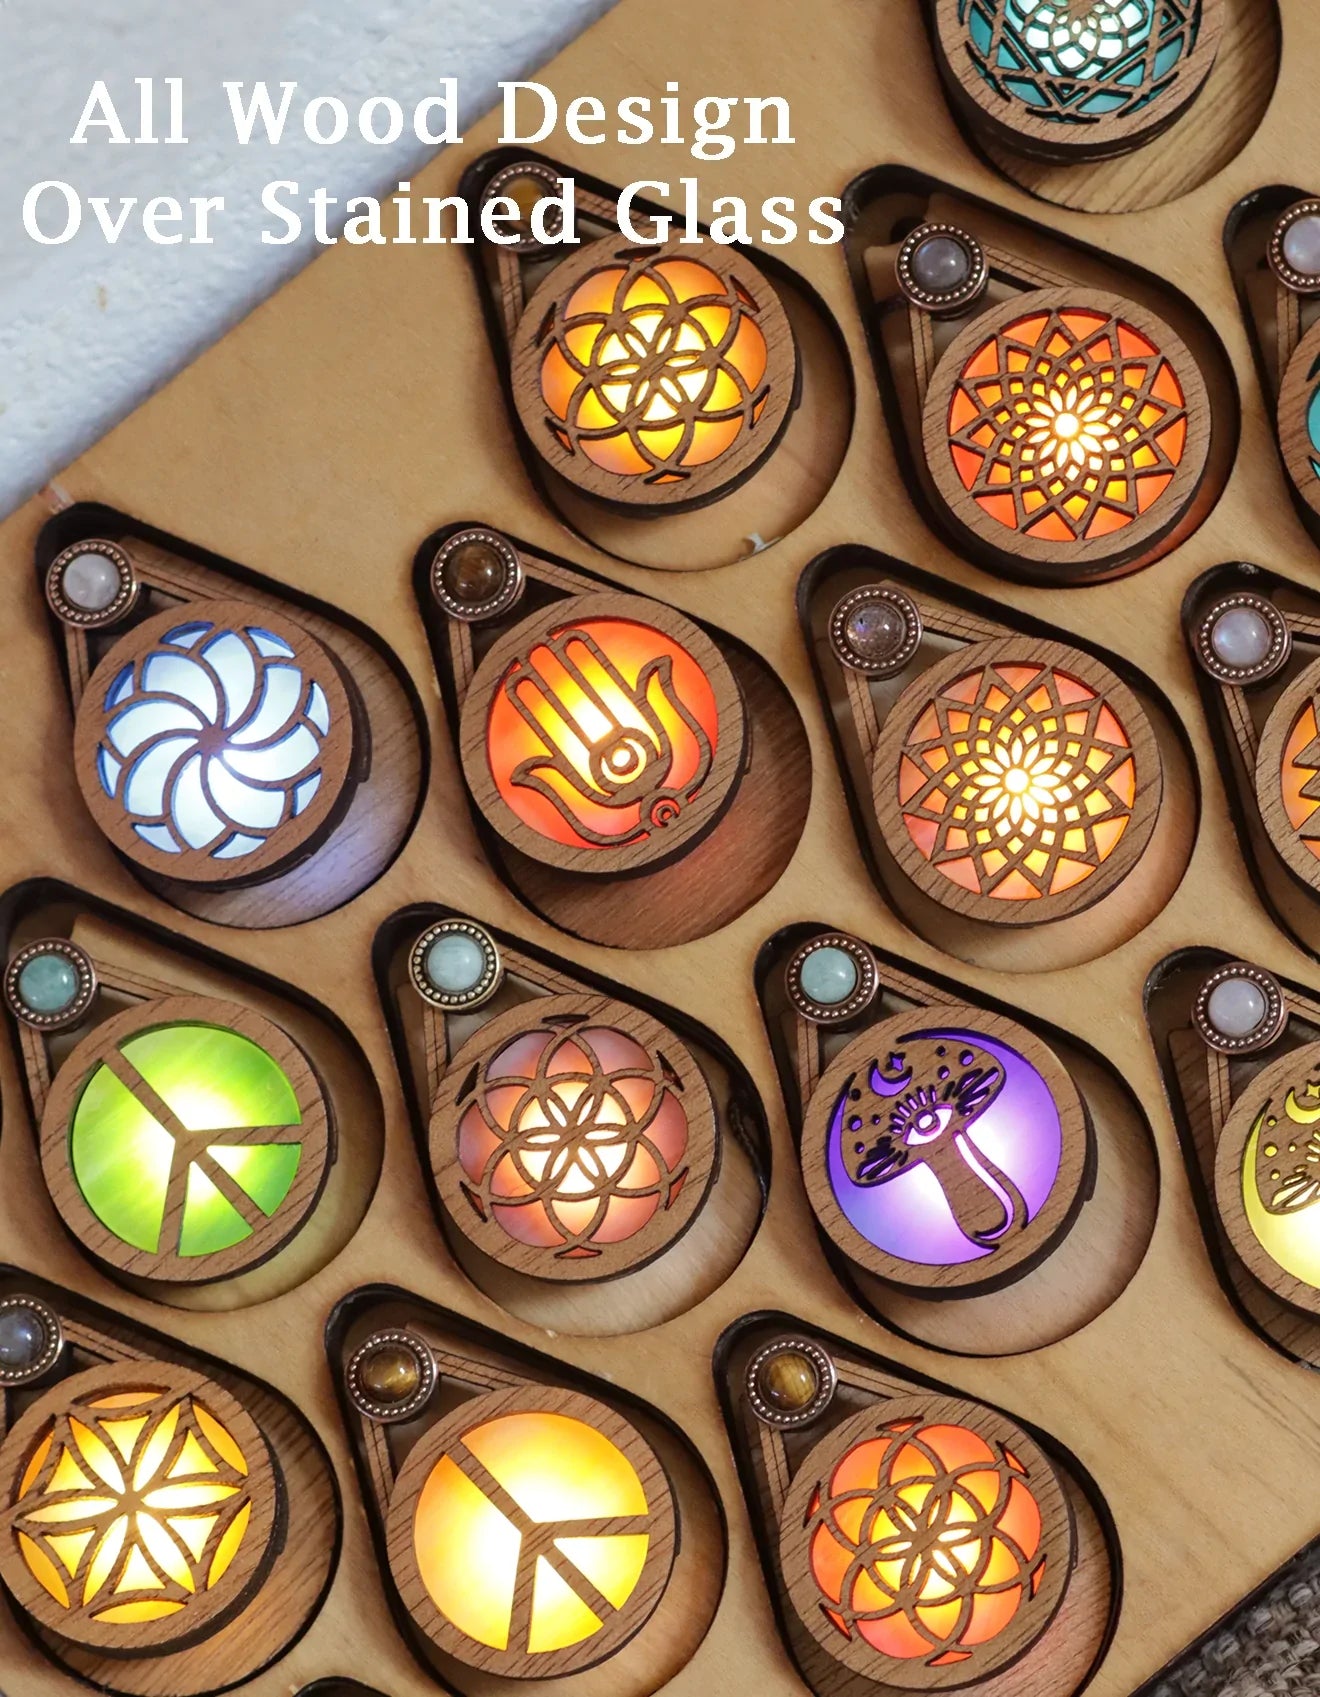 Glowing Iridescent Stained Glass Wooden LED Pendant | Spiraling Flower